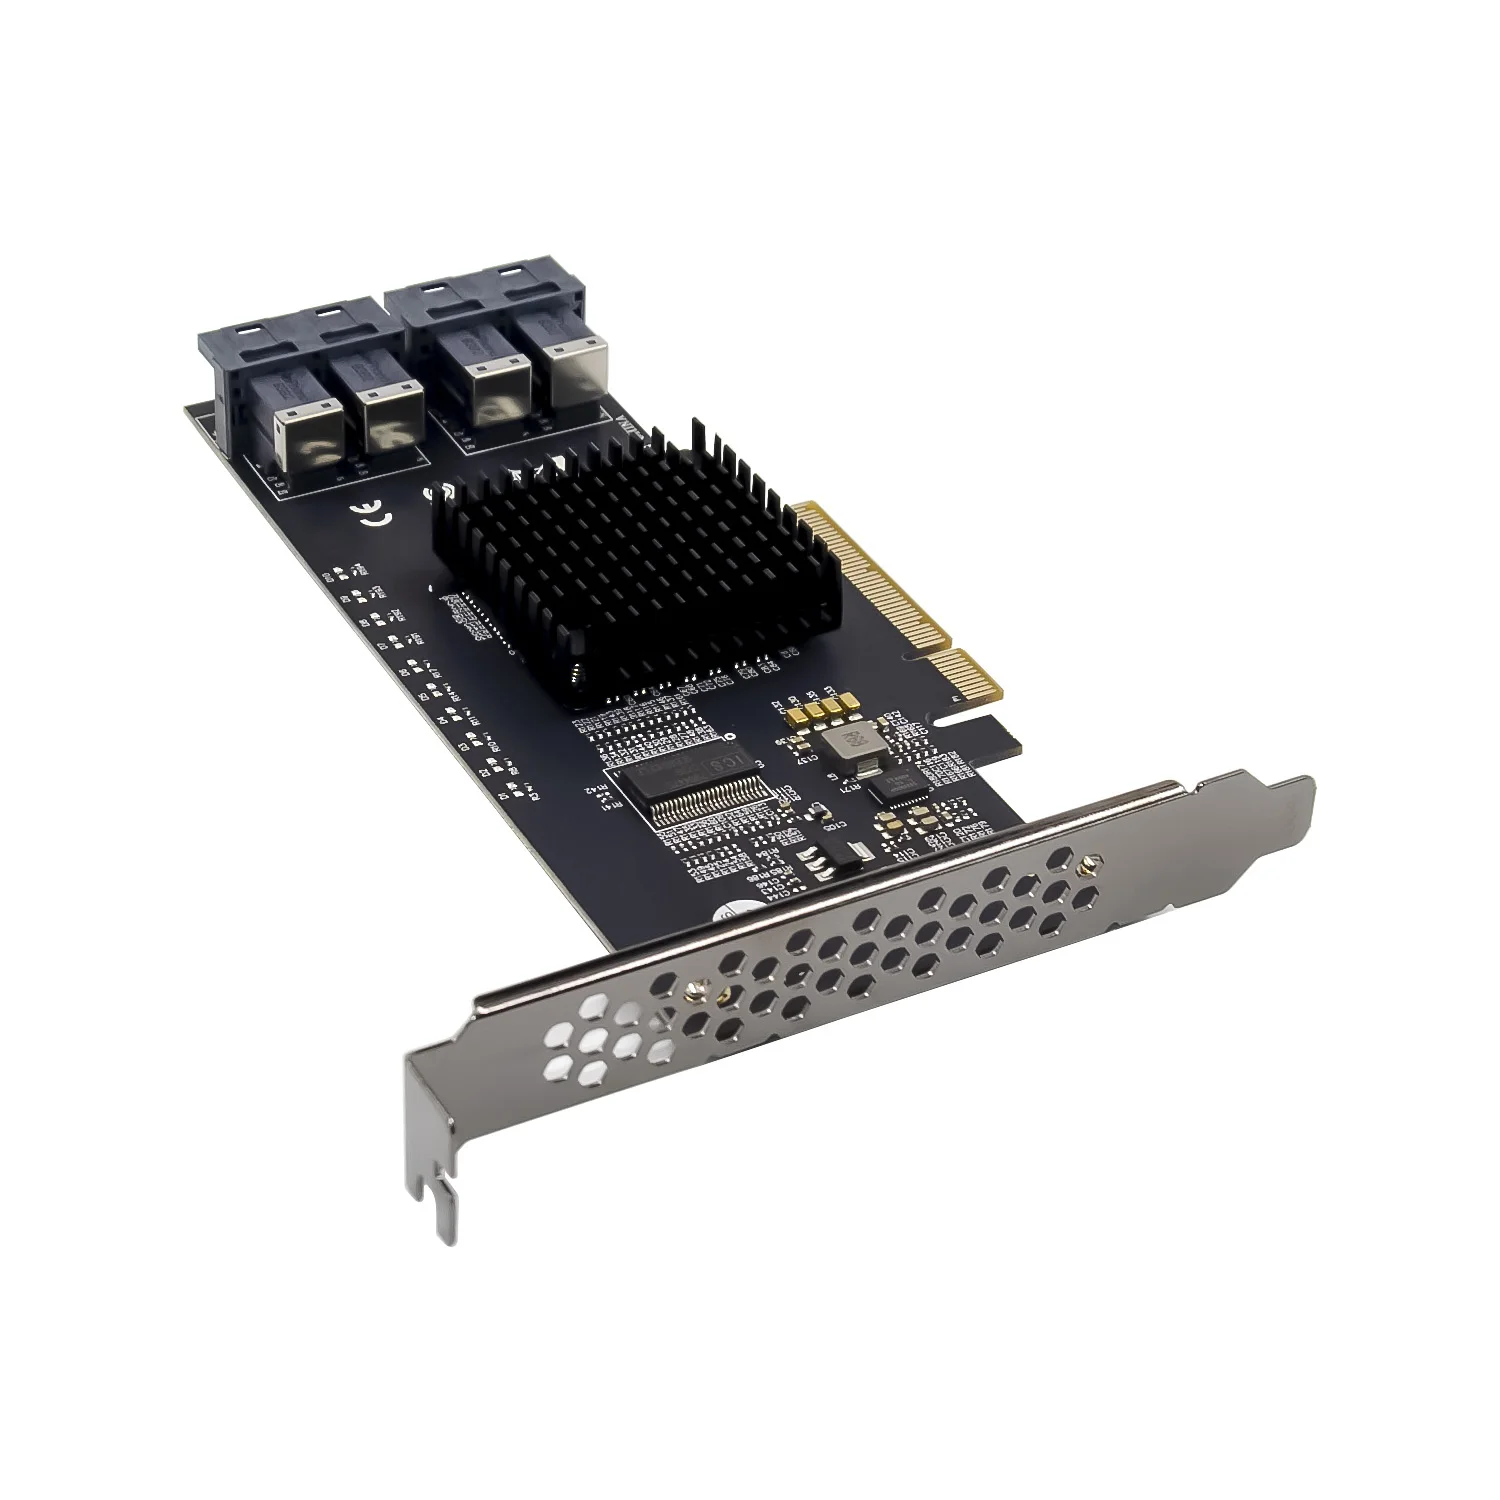 ST537 PCIe X8 PEX8724 U.2 4-Ports SFF8643 NVME SSD card Expansion device Adapter HBA Card